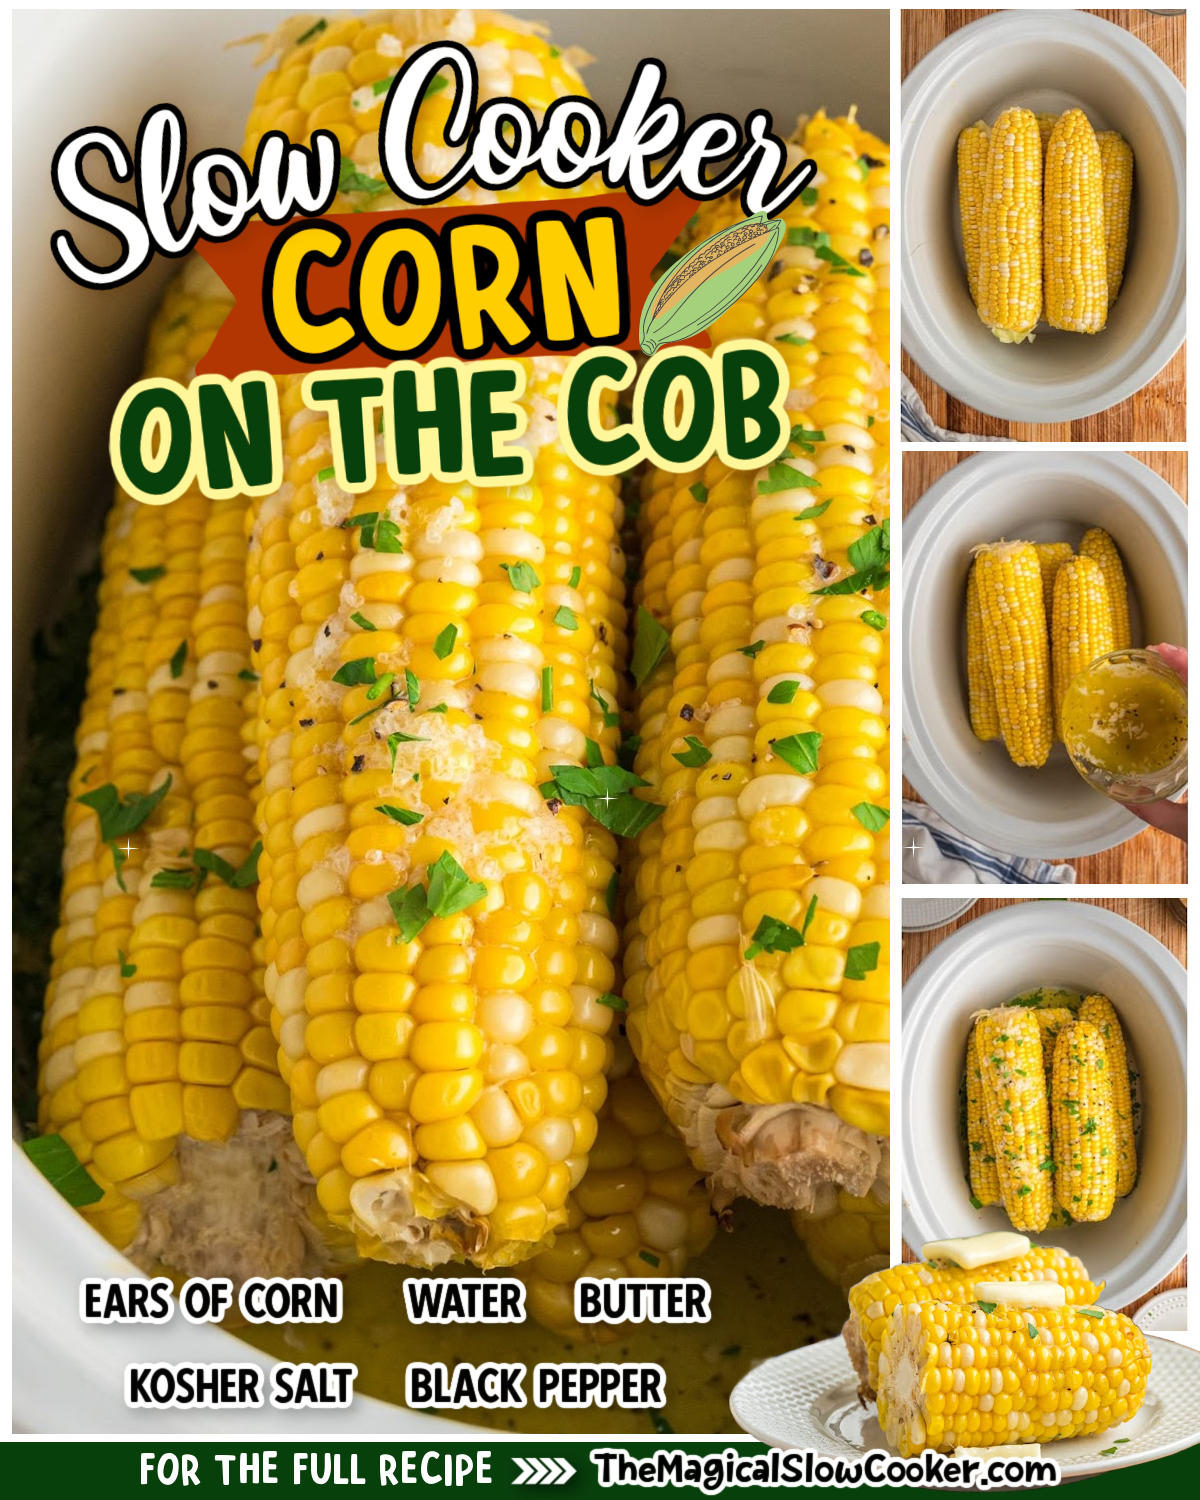 Images of corn on the cob with text overlay for facebook.